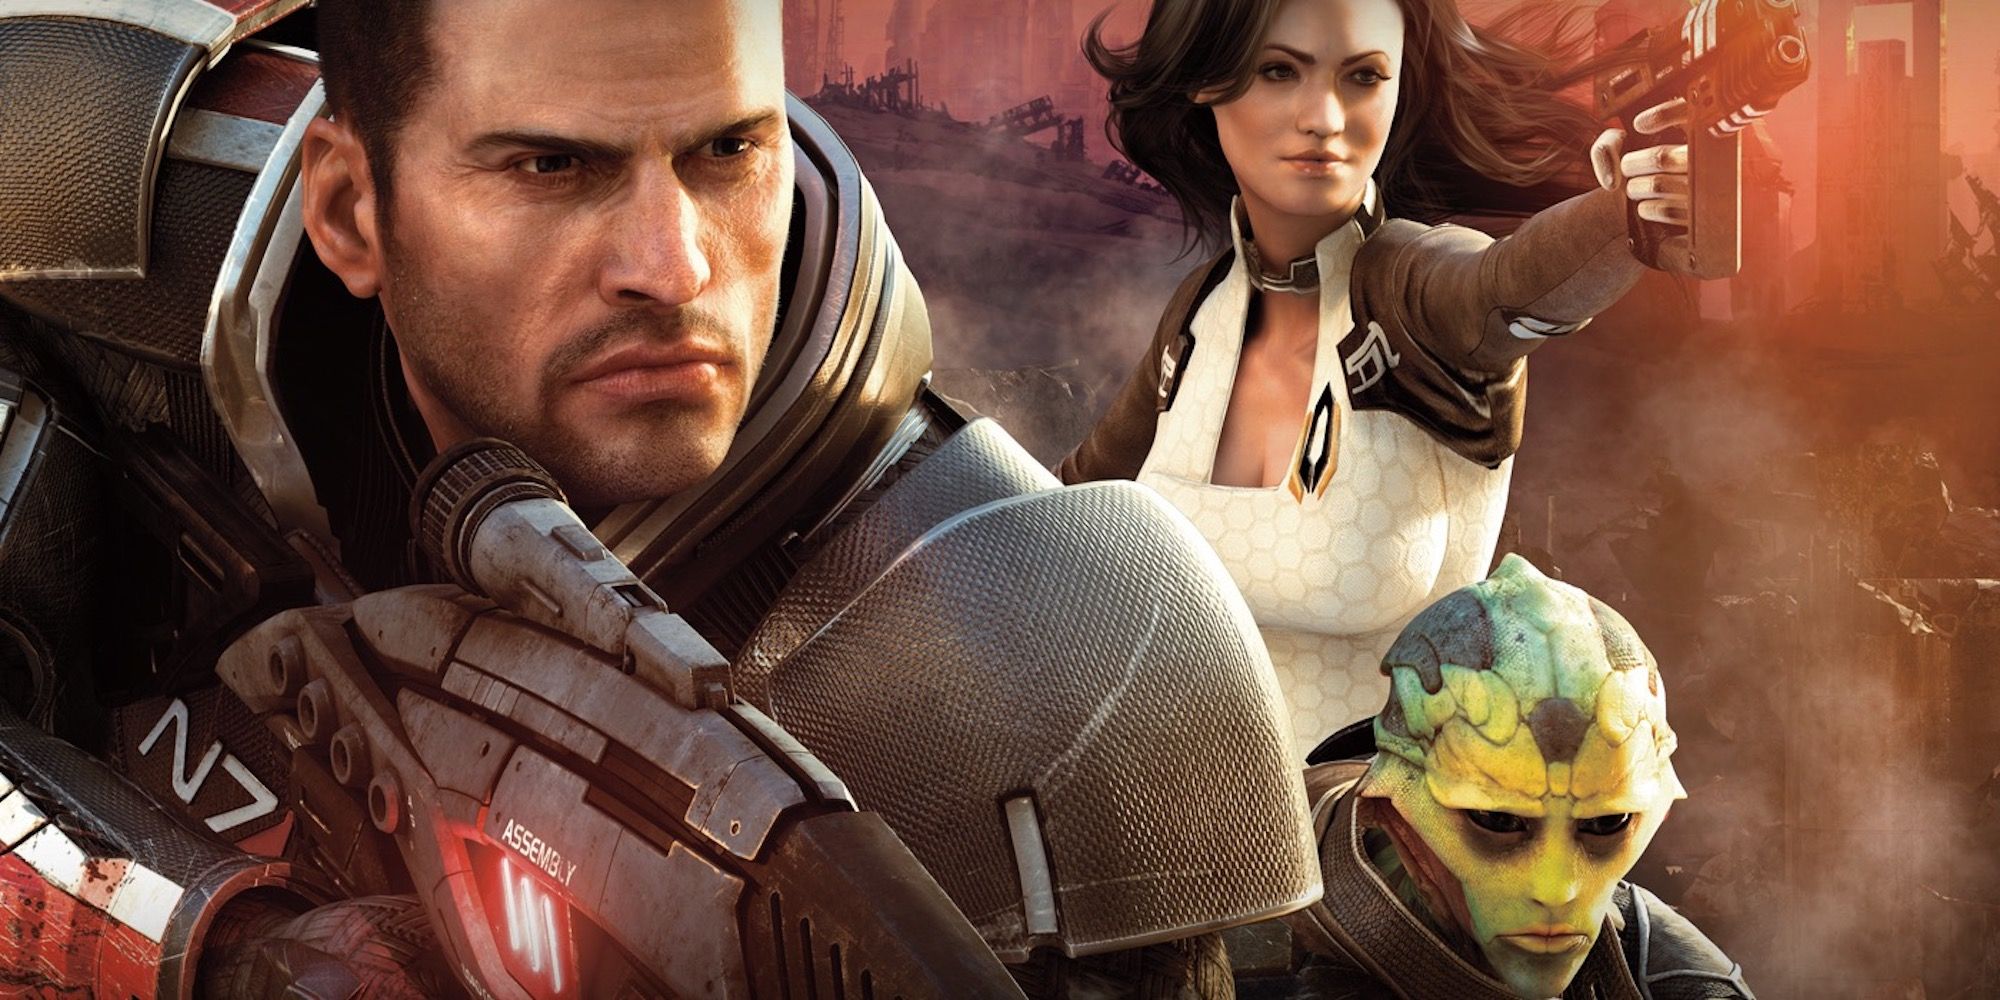 Promo art featuring characters Mass Effect 2